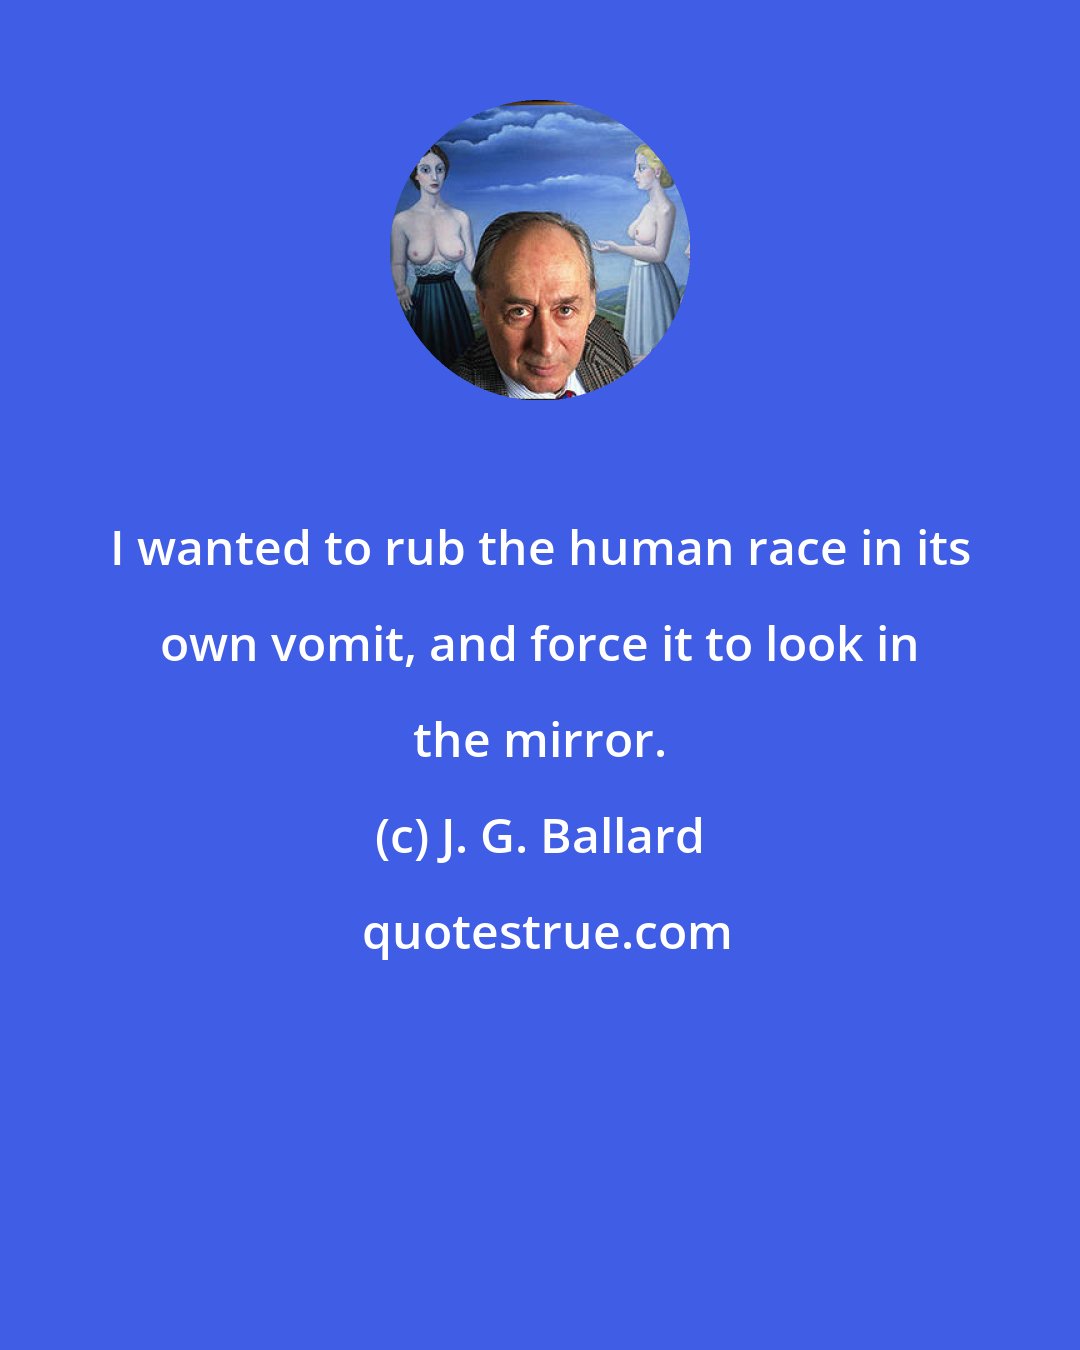 J. G. Ballard: I wanted to rub the human race in its own vomit, and force it to look in the mirror.